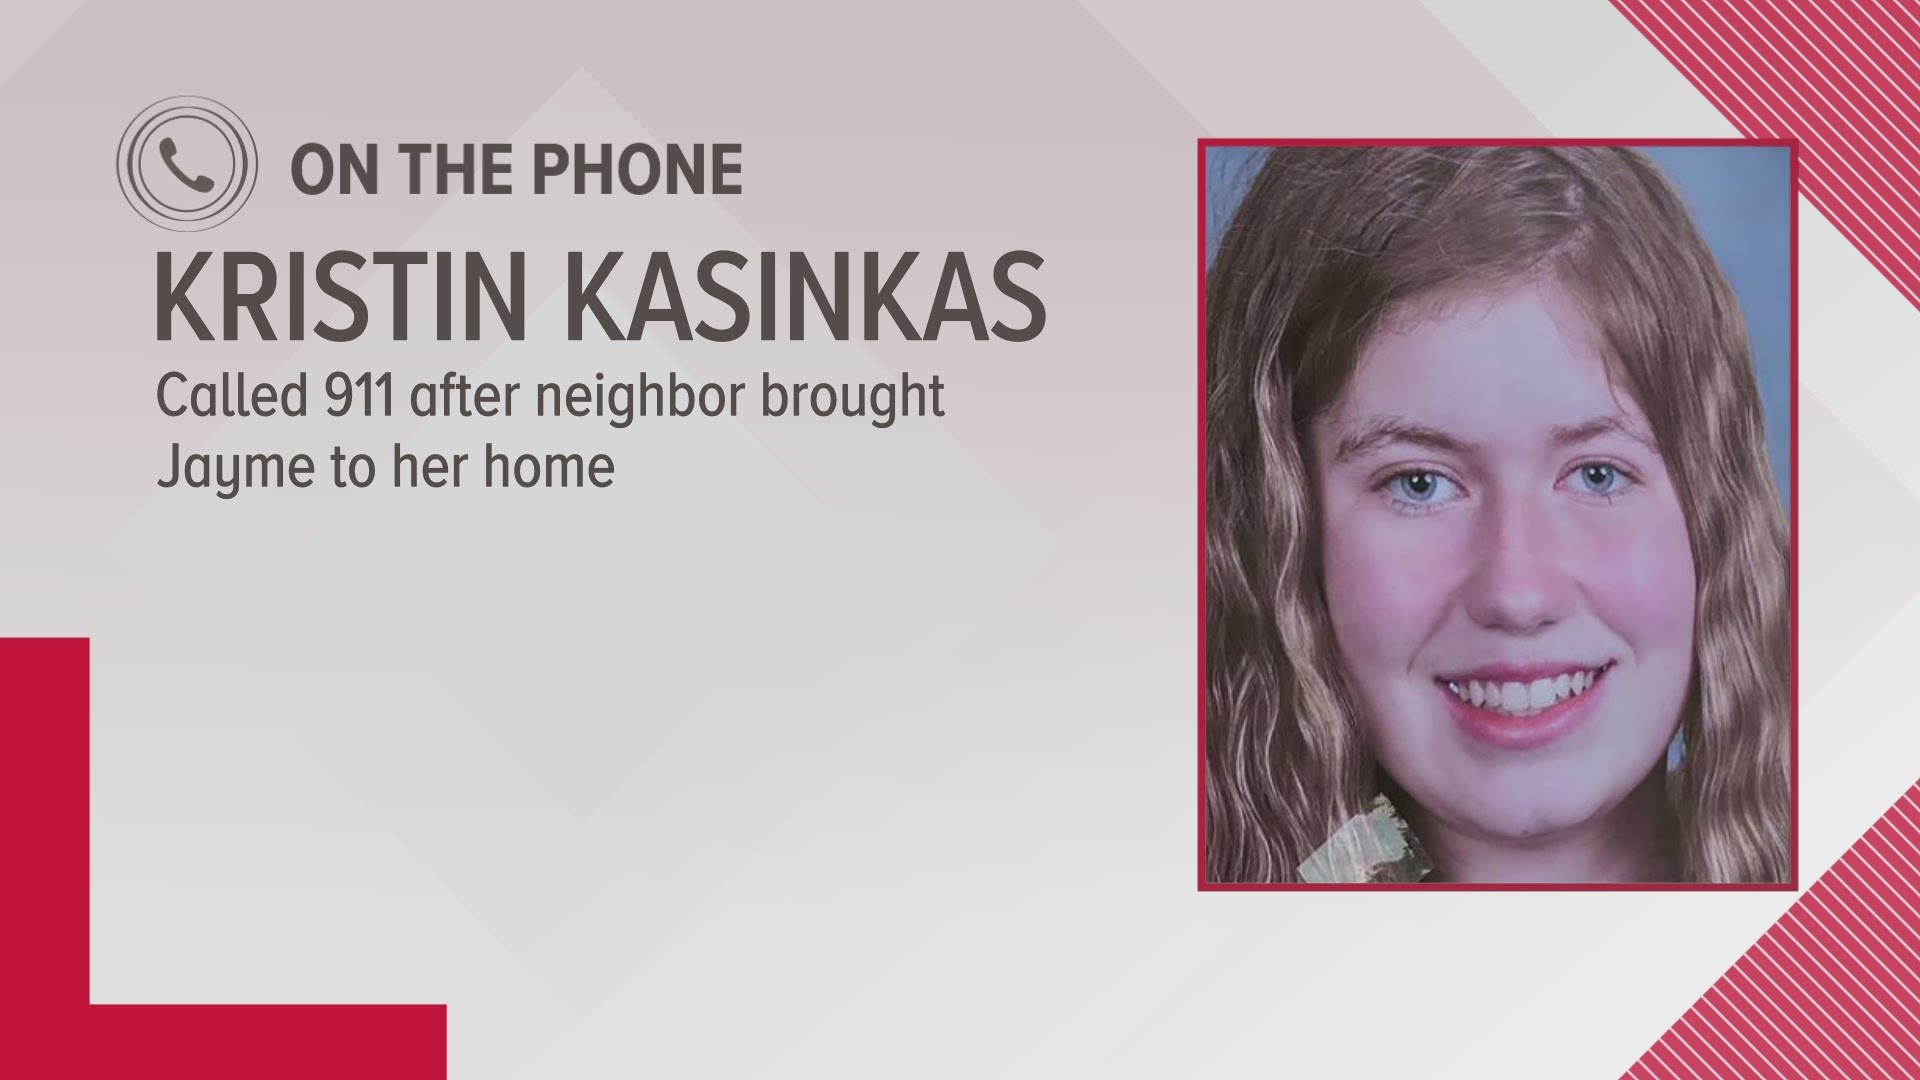 Kristin Kasinskas says she was just getting home from work around 4 p.m. Thursday when her neighbor ran up to her door and said, "Call 911, this is Jayme Closs." She shared what happened next with KARE 11's Danny Spewak.